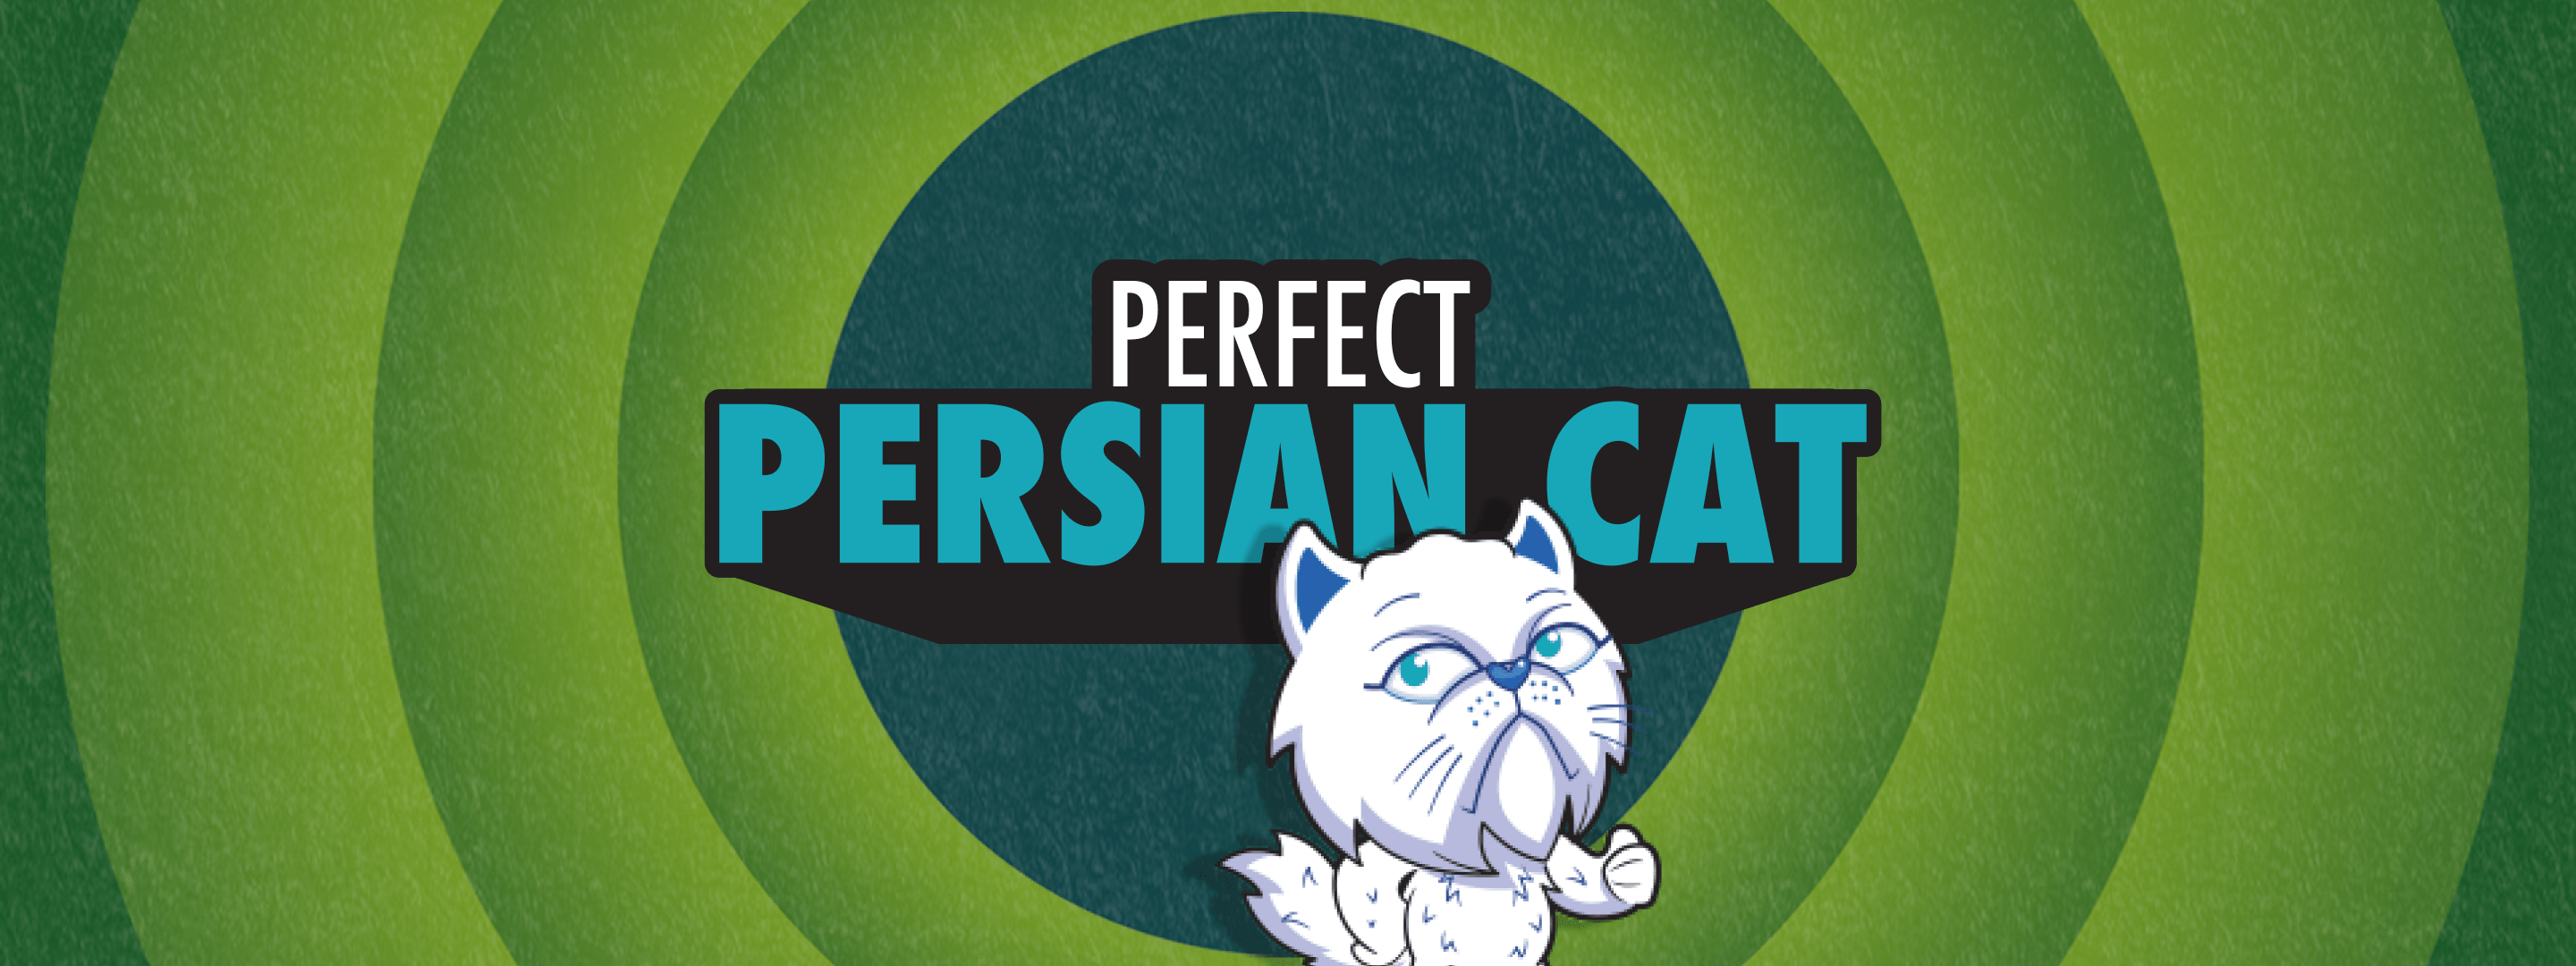 How To Post In Perfect Persian on Social Media